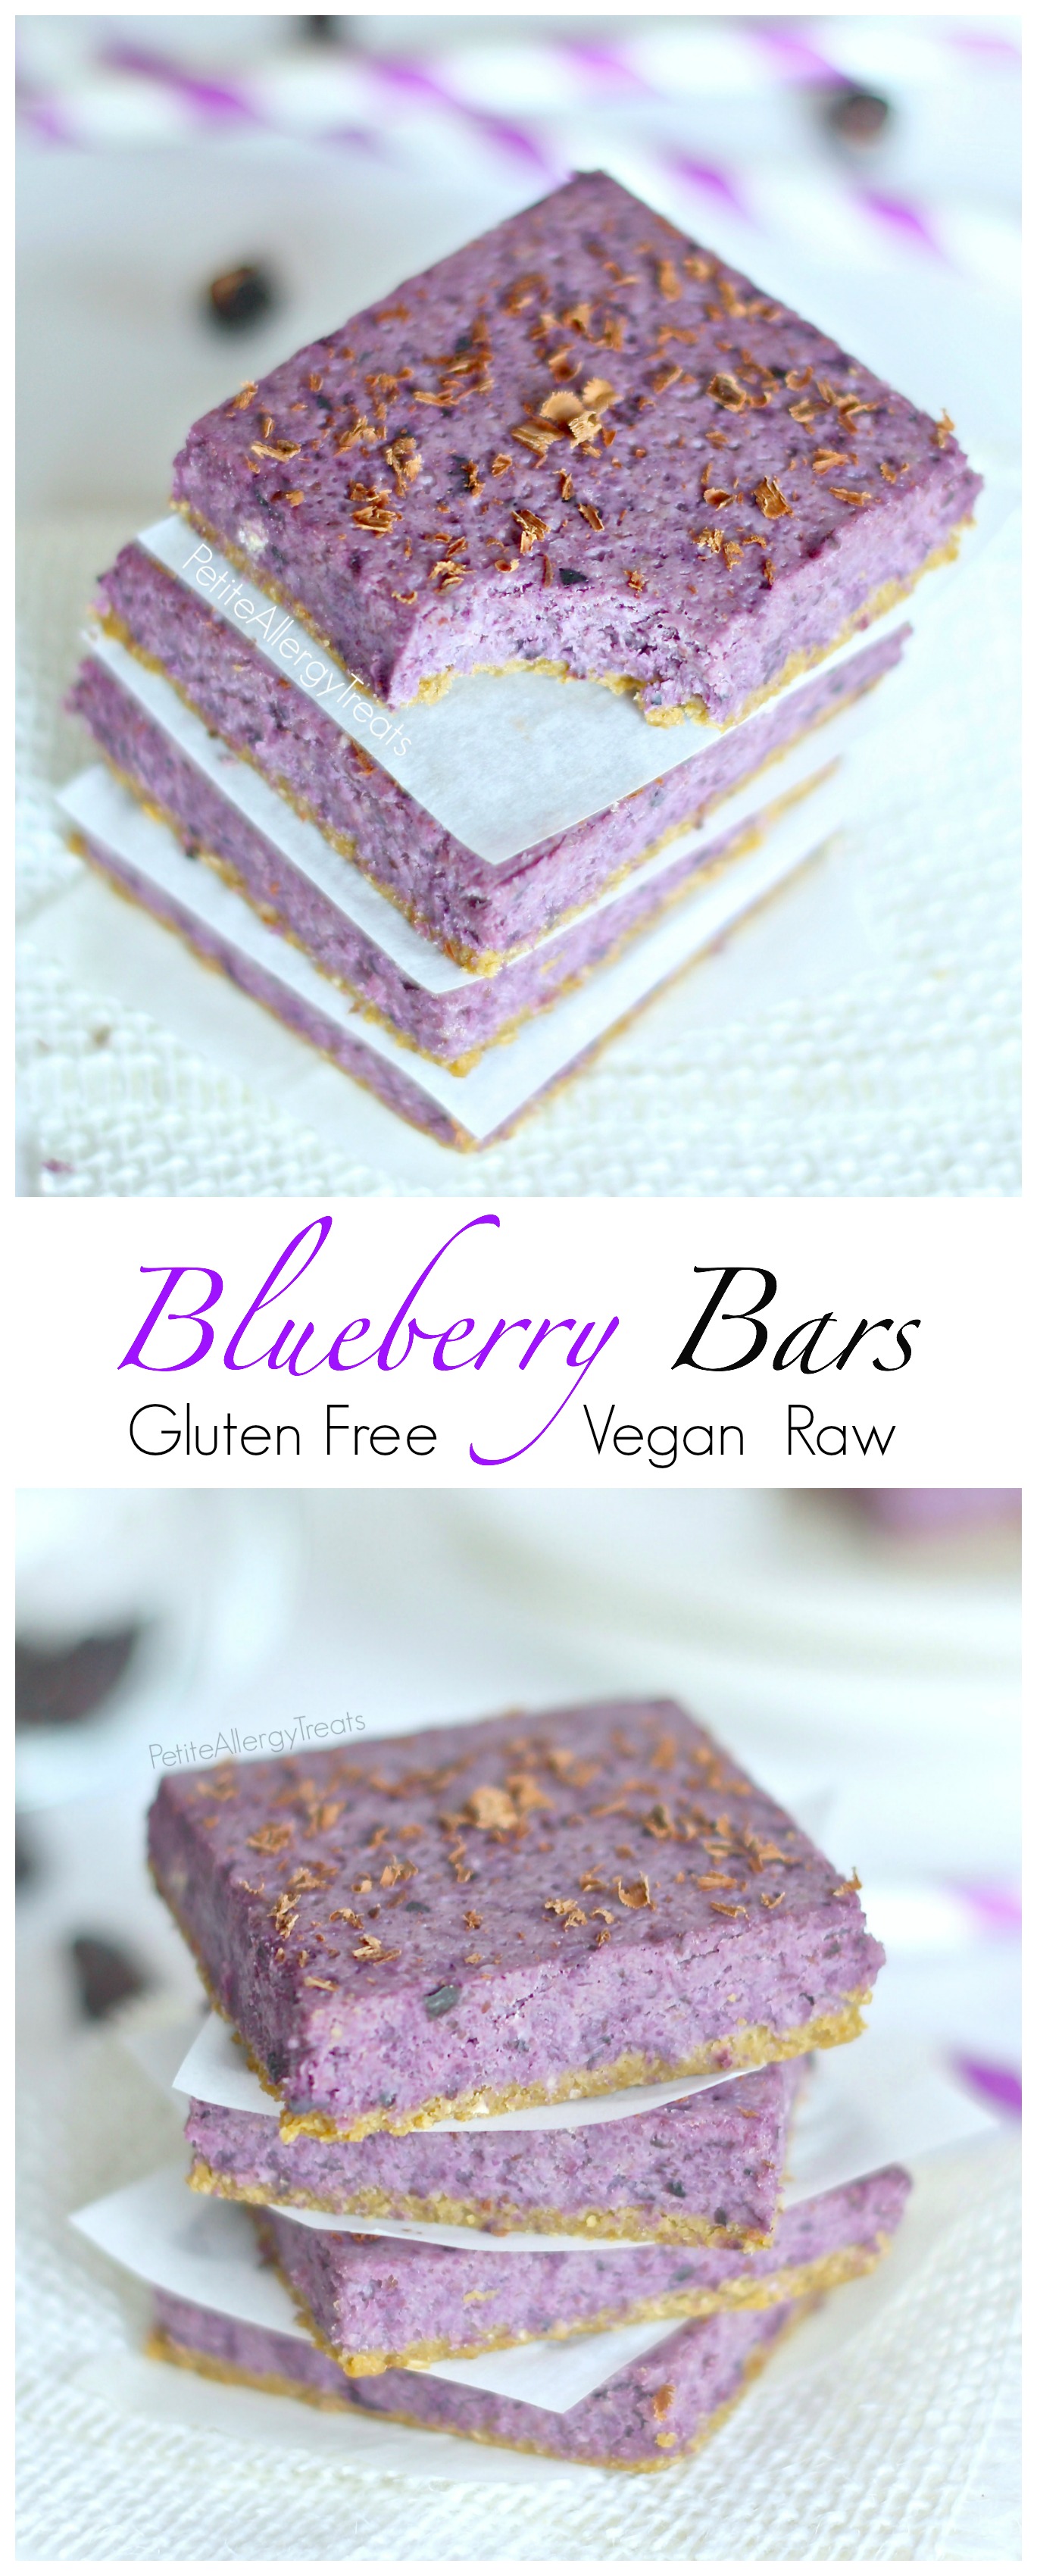 Blueberry Bars (gluten free vegan raw) Naturally beautiful blueberry oat bars bursting with real blueberries.